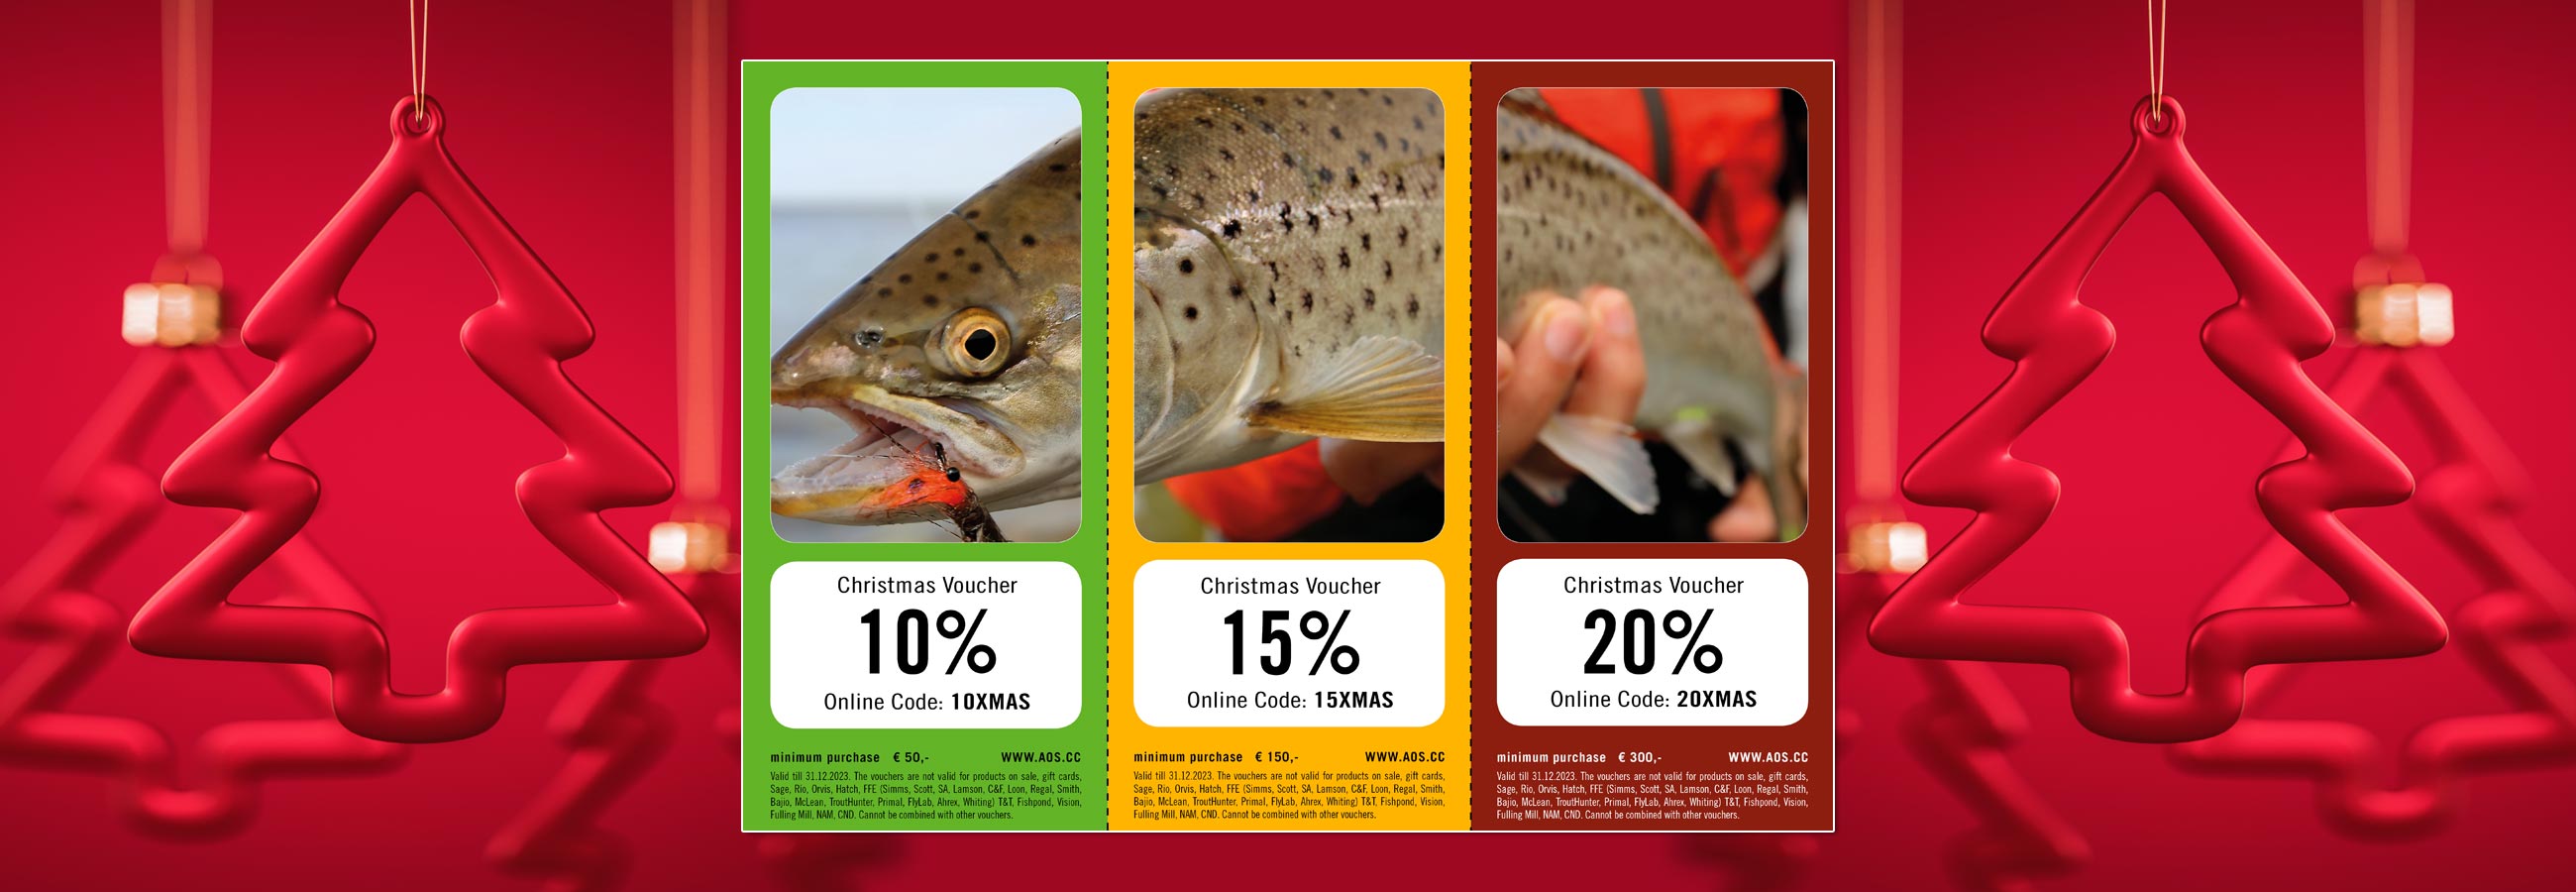 Fly Fishing - Fly Tying - up to 20% OFF on your next purchase! AOS Christmas Voucher